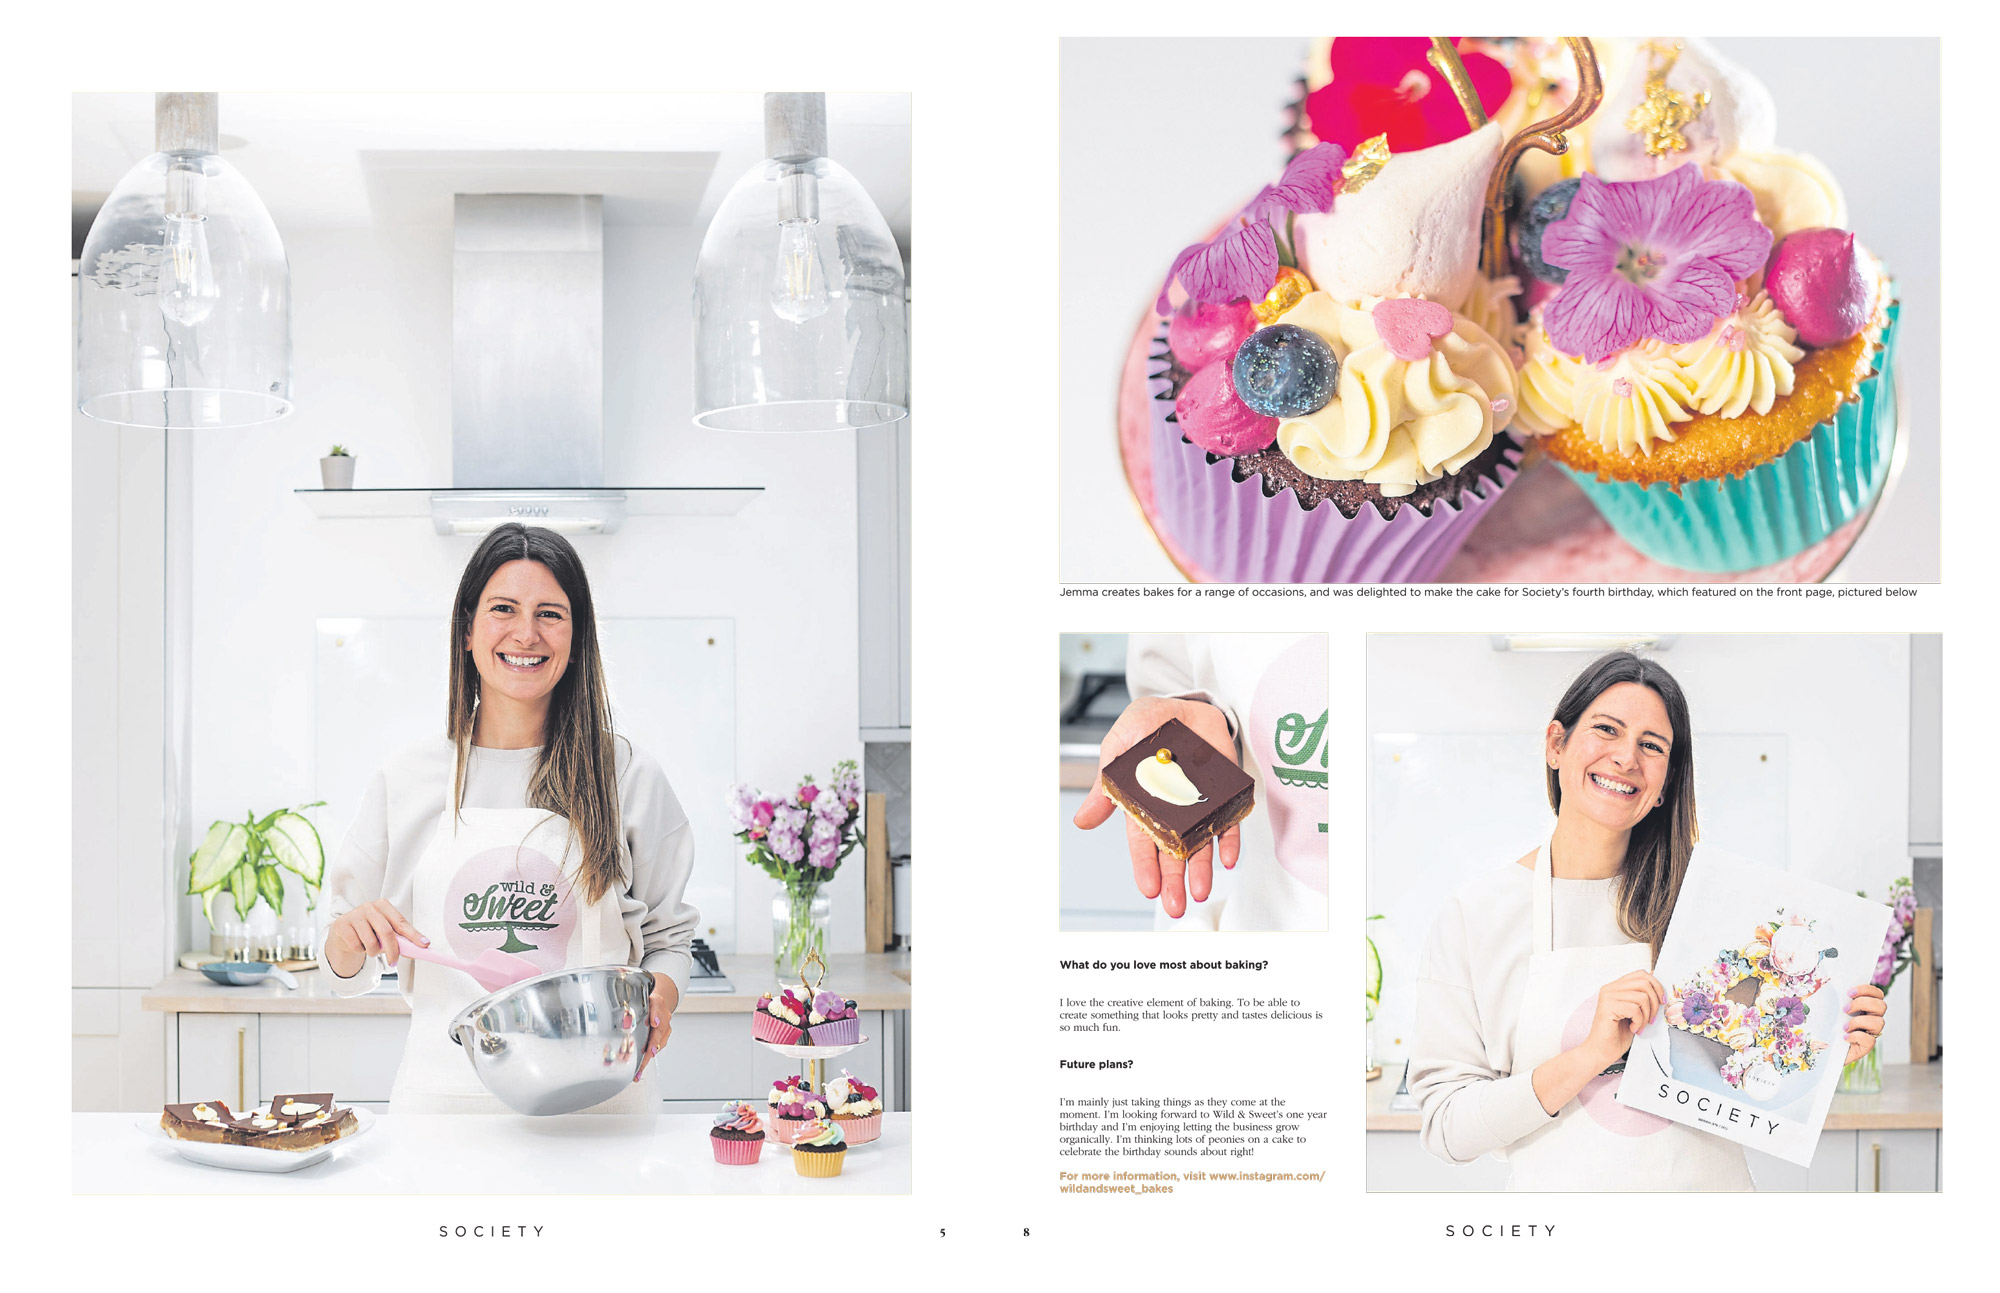 Pictures from SOCIETY Magazine show a baker in her home kitchen mixing cake batter and images of the cakes when baked, the cupcakes have flowers and berries ontop of buttercream icing. Press food and drink photographer photographs by Scott Cameron Baxter.